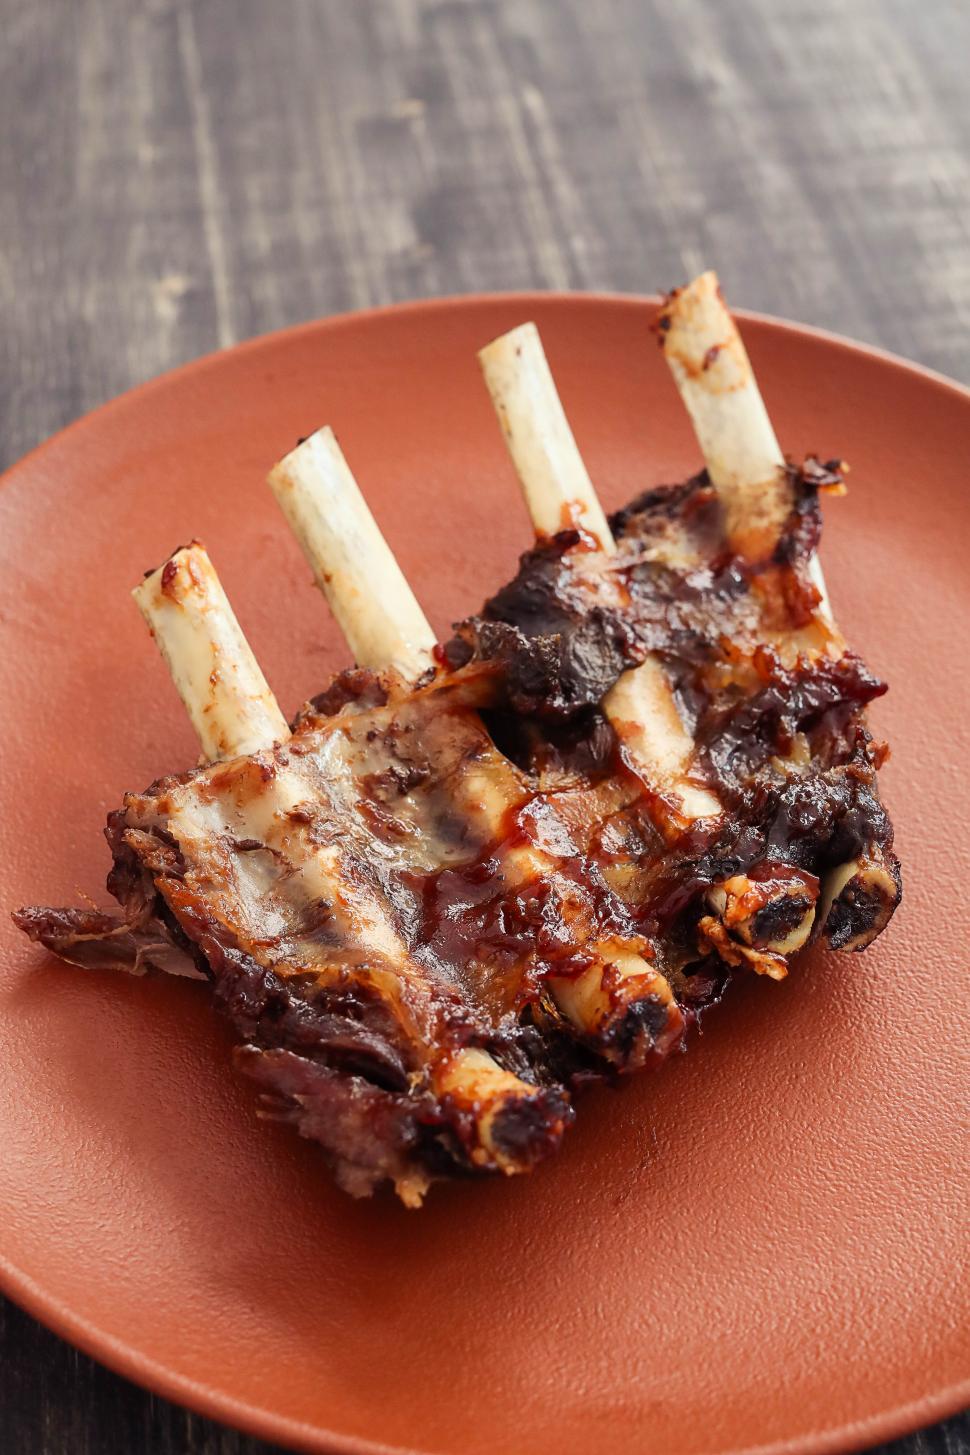 Free Image of Ribs on a plate 